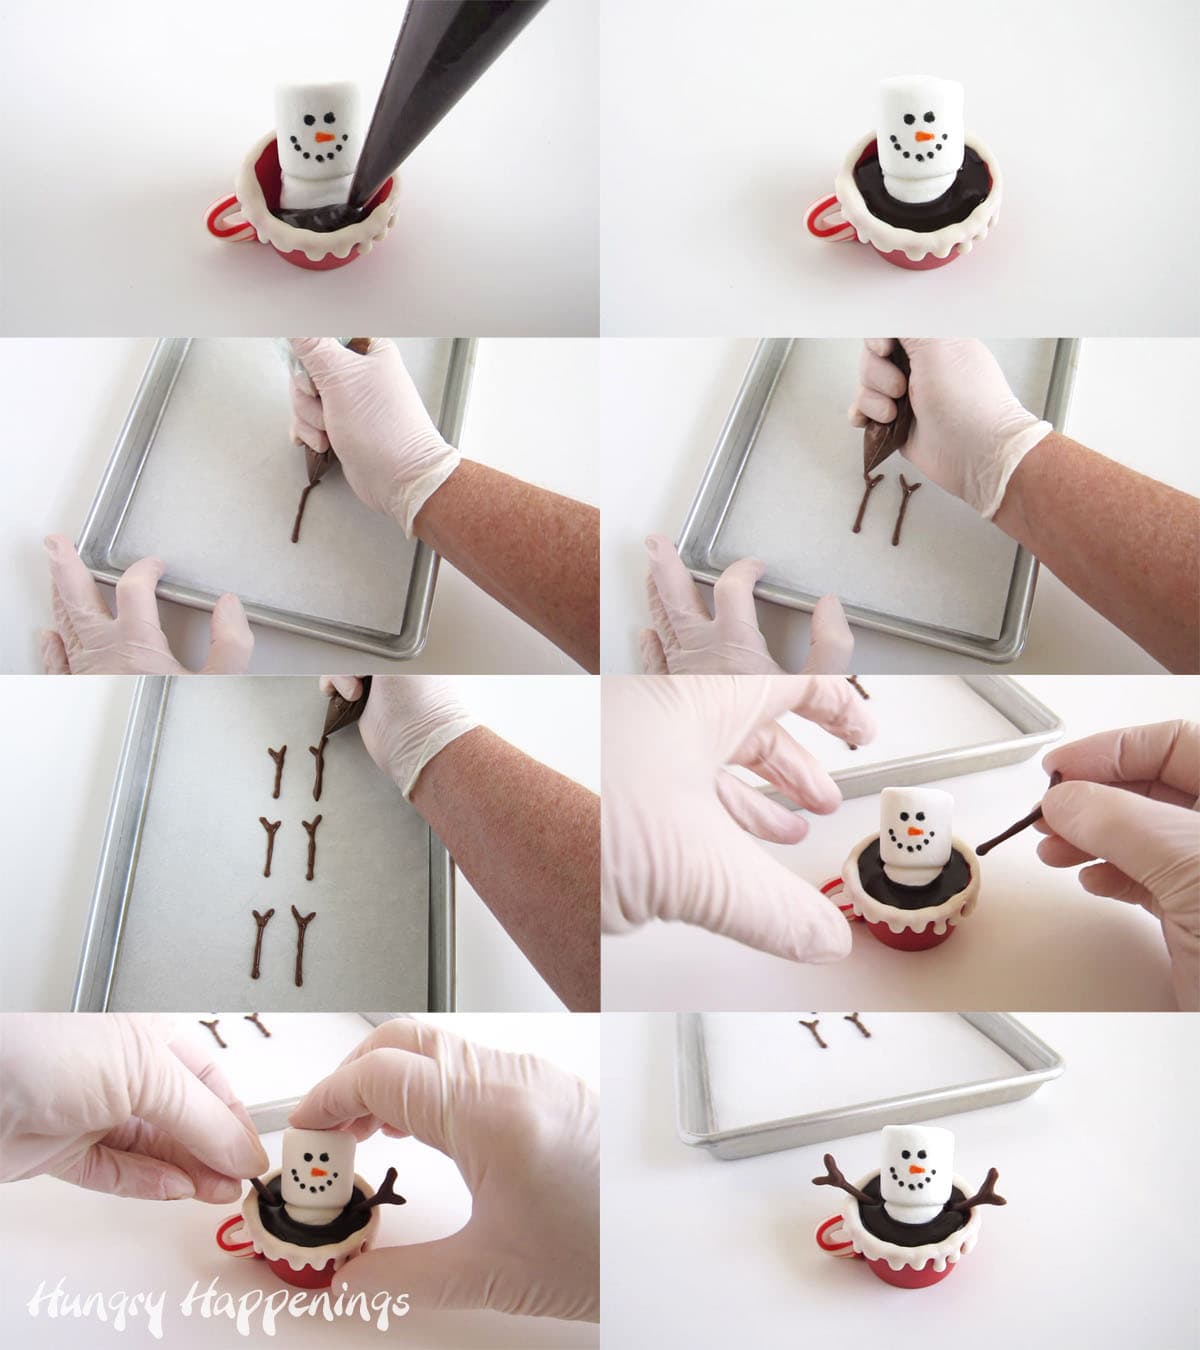 Fill the chocolate cocoa mugs with chocolate ganache then attach chocolate arms to the marshmallow snowman.